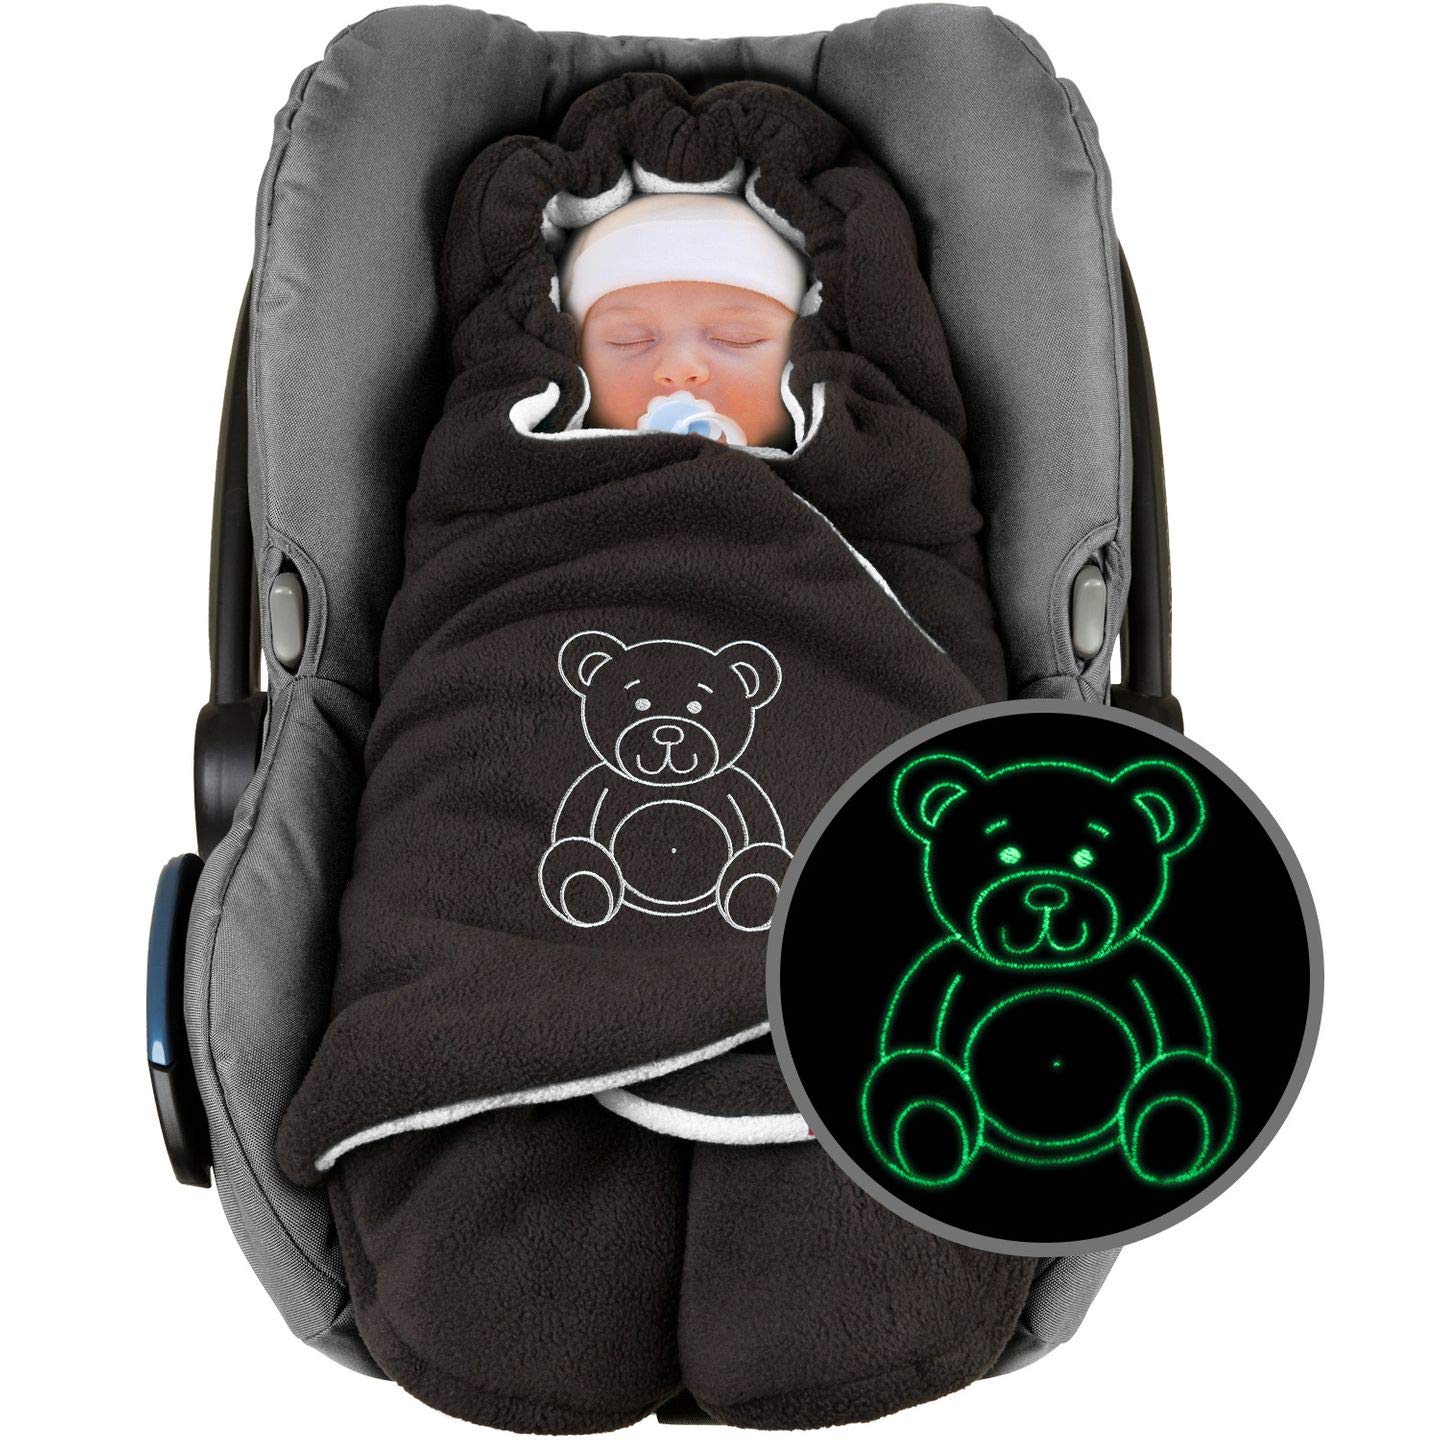 ByBoom Original With Bears Baby Winter Swaddling Blanket, Universal, For Baby Seat, Car Seat Such As Maxi-Cosi, Römer, For Pram, Pushchair or Baby Bed